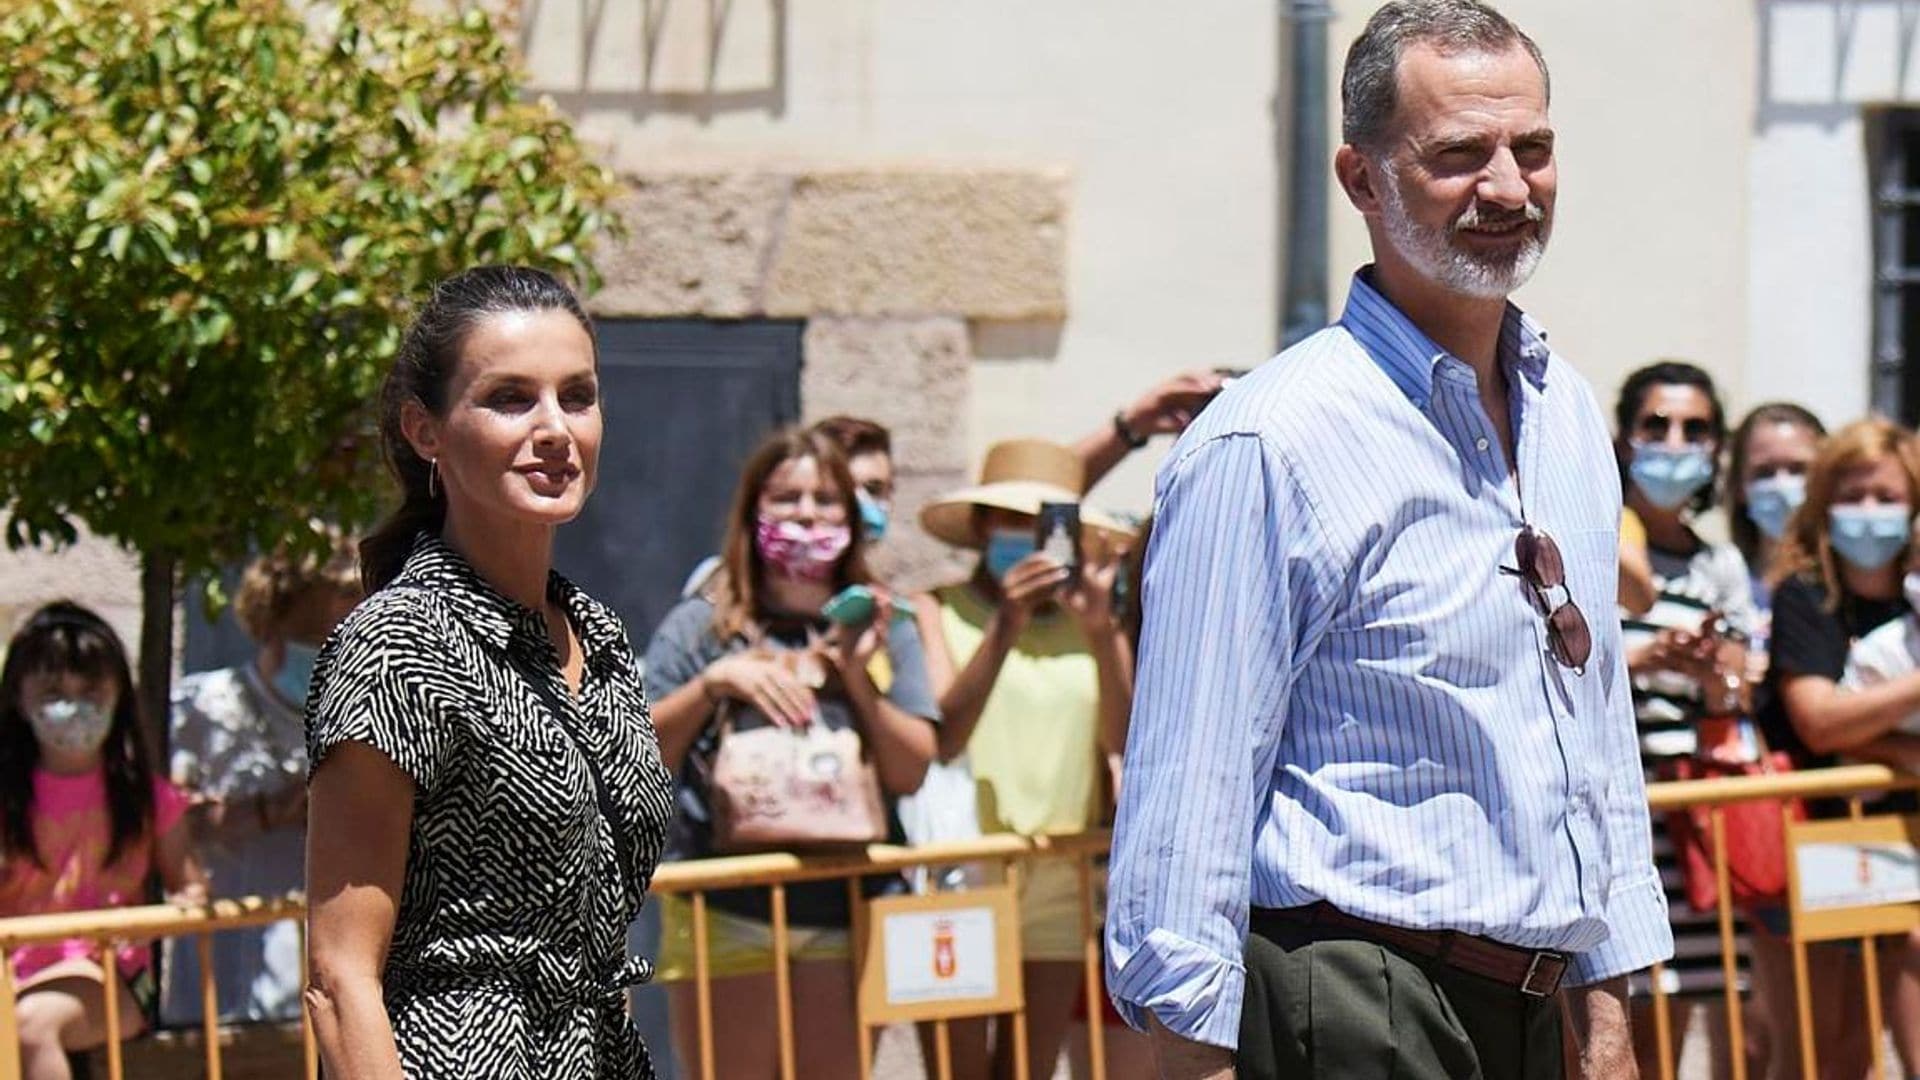 Queen Letizia has found the perfect summer jumpsuit and it costs less than $100